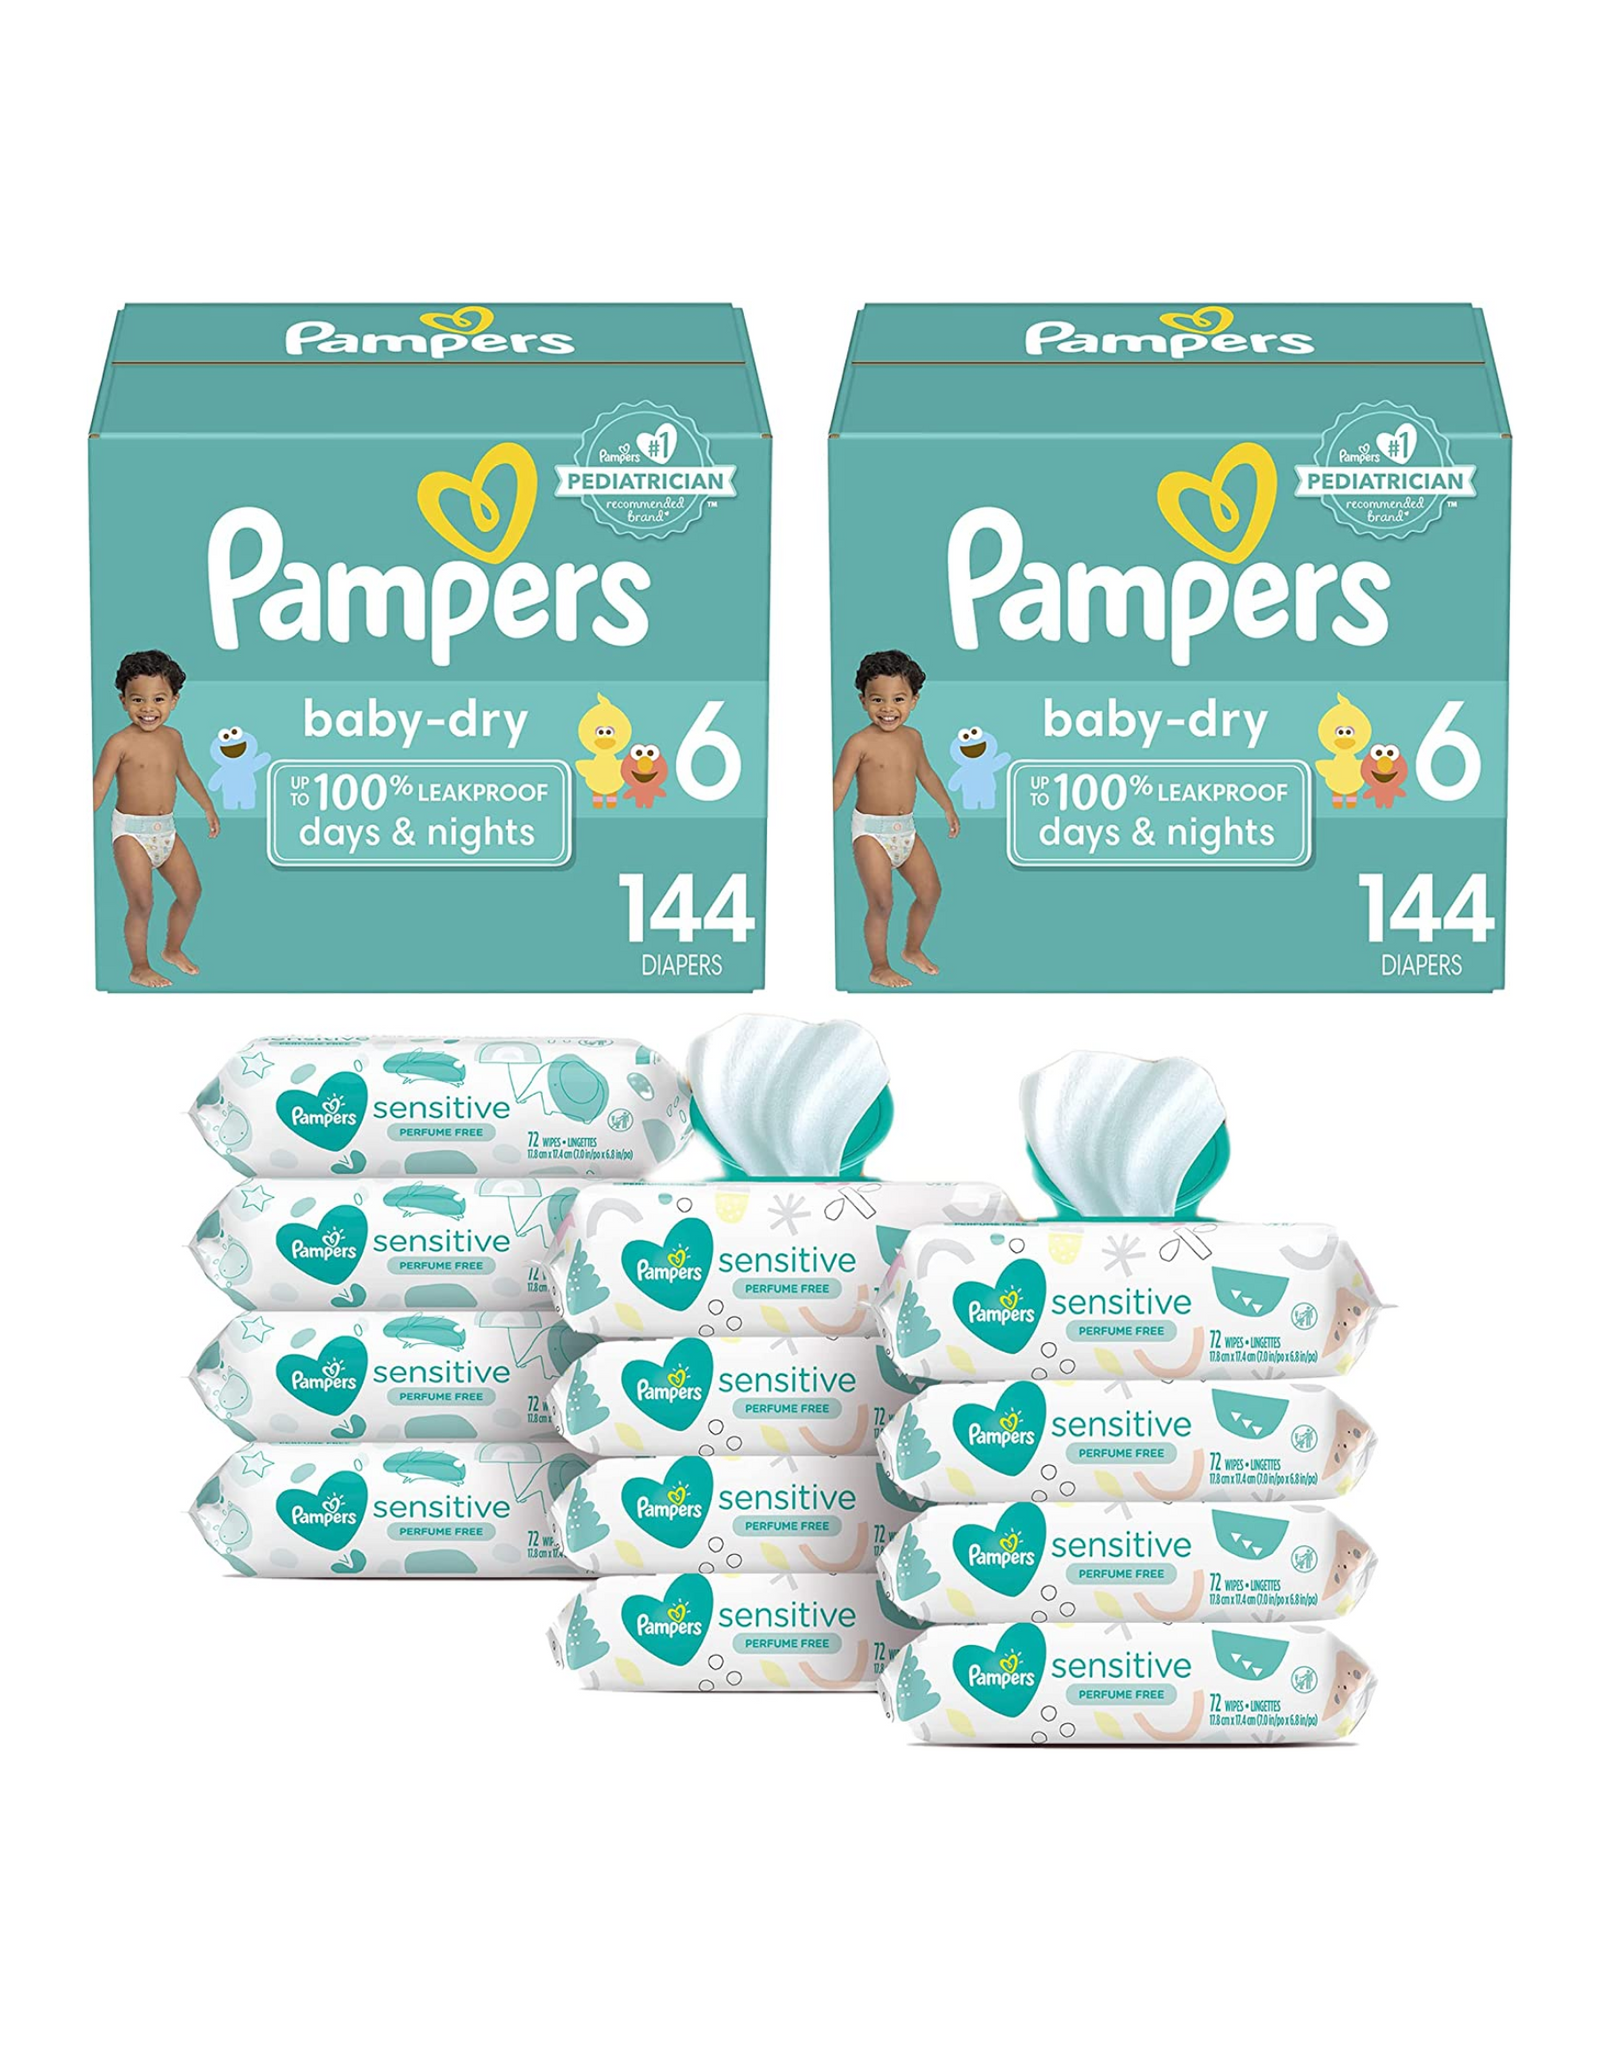 Pampers Baby Dry Disposable Baby Diapers Size 6, 144 Ct (2 Pack) with Sensitive Water Based Baby Wipes, 18 Pop-Top Packs + 4 Refills, 864 total wipes (12 Packs)